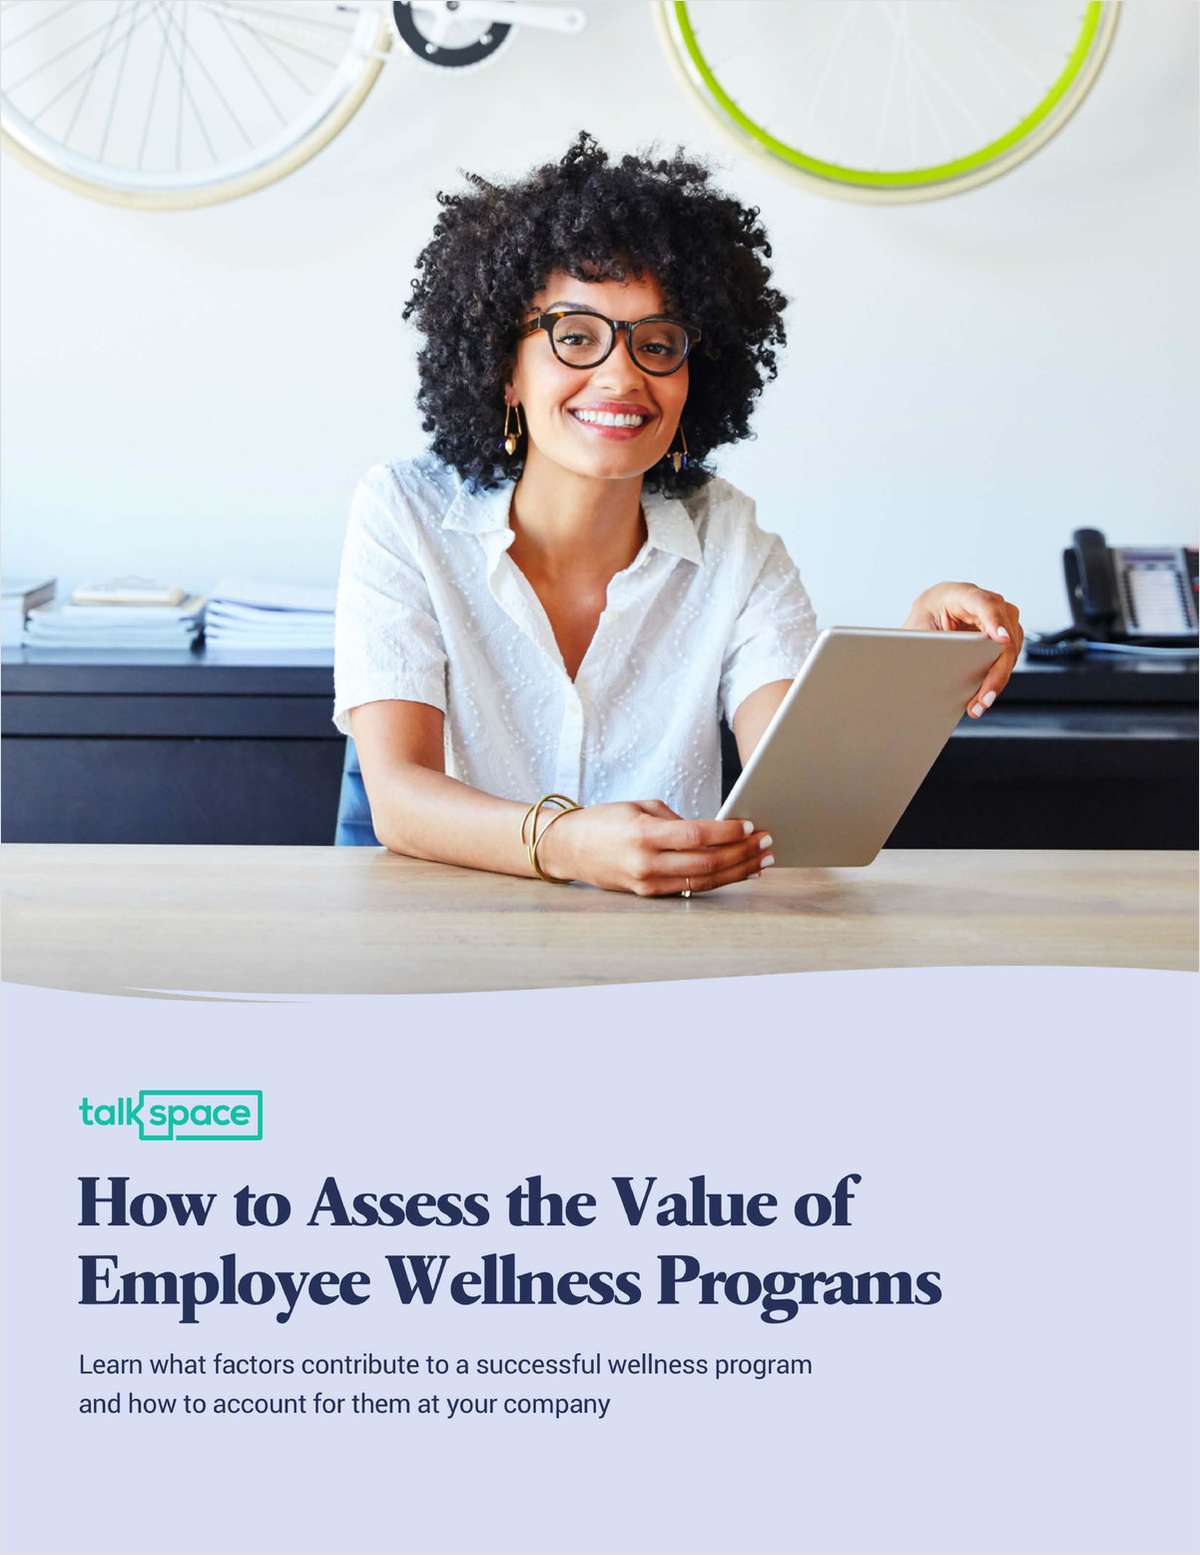 How to assess the value of employee wellness programs